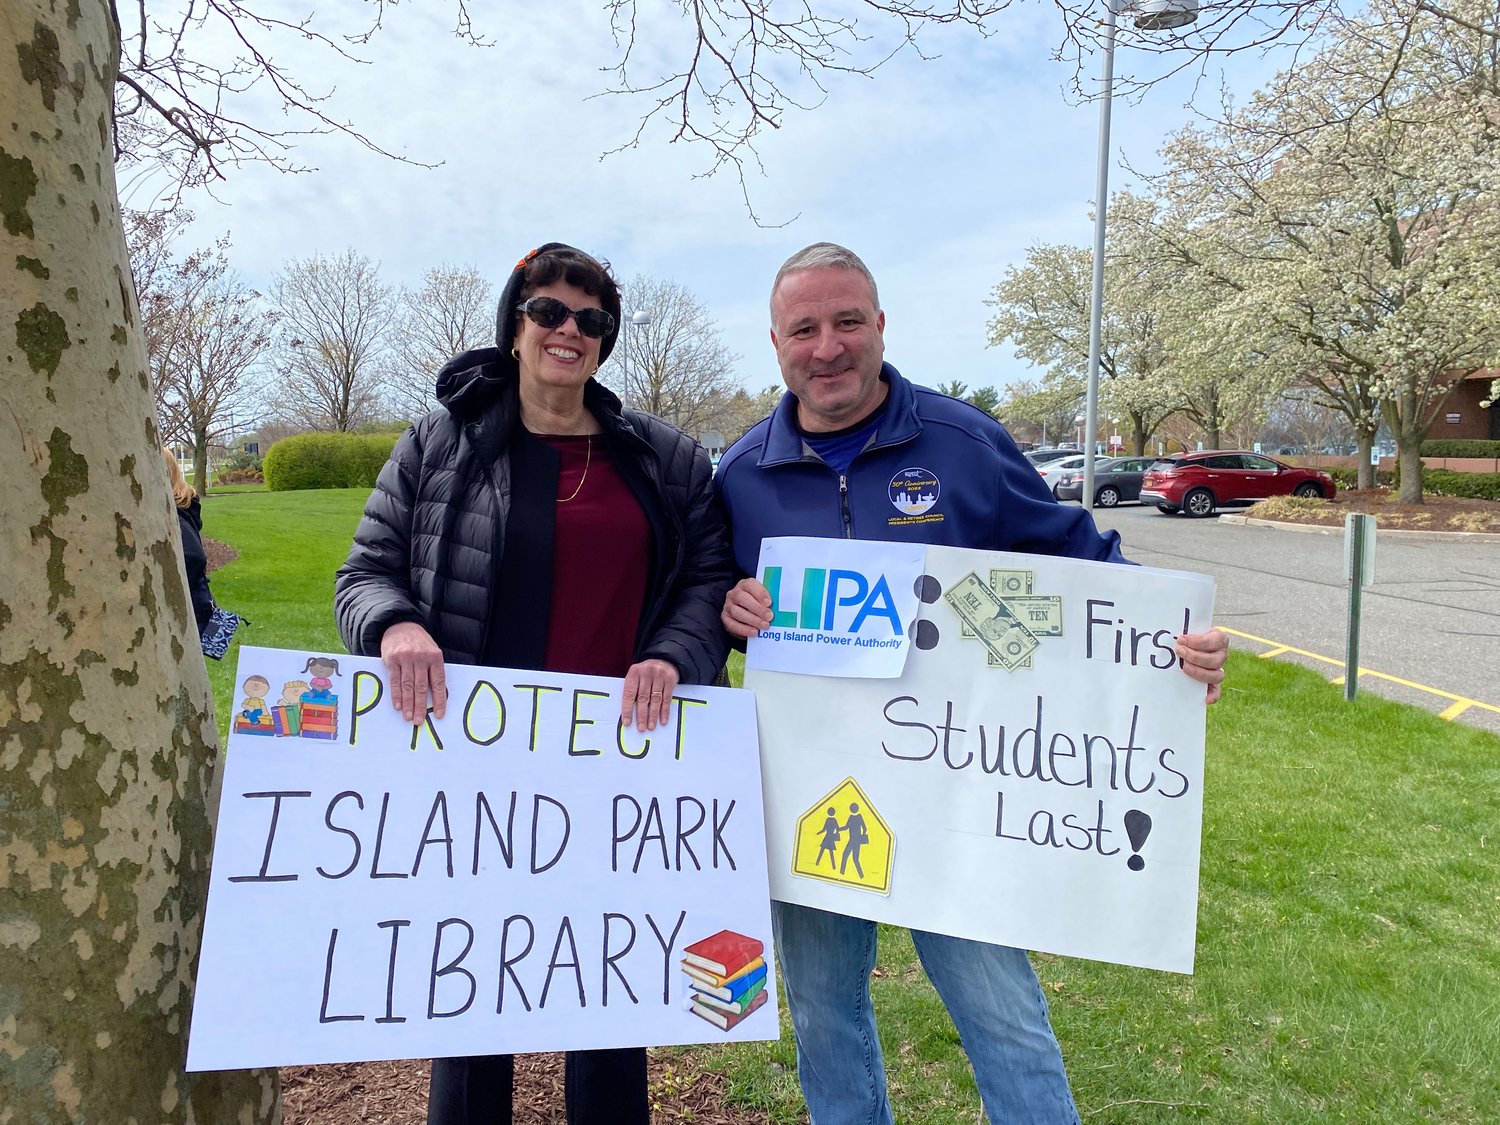 Island Park Library Director Jessica Koenig, left, and Trustee Dean Bacigalupo attended the protest. The LIPA agreement could have severe financial ramifications for library programs.